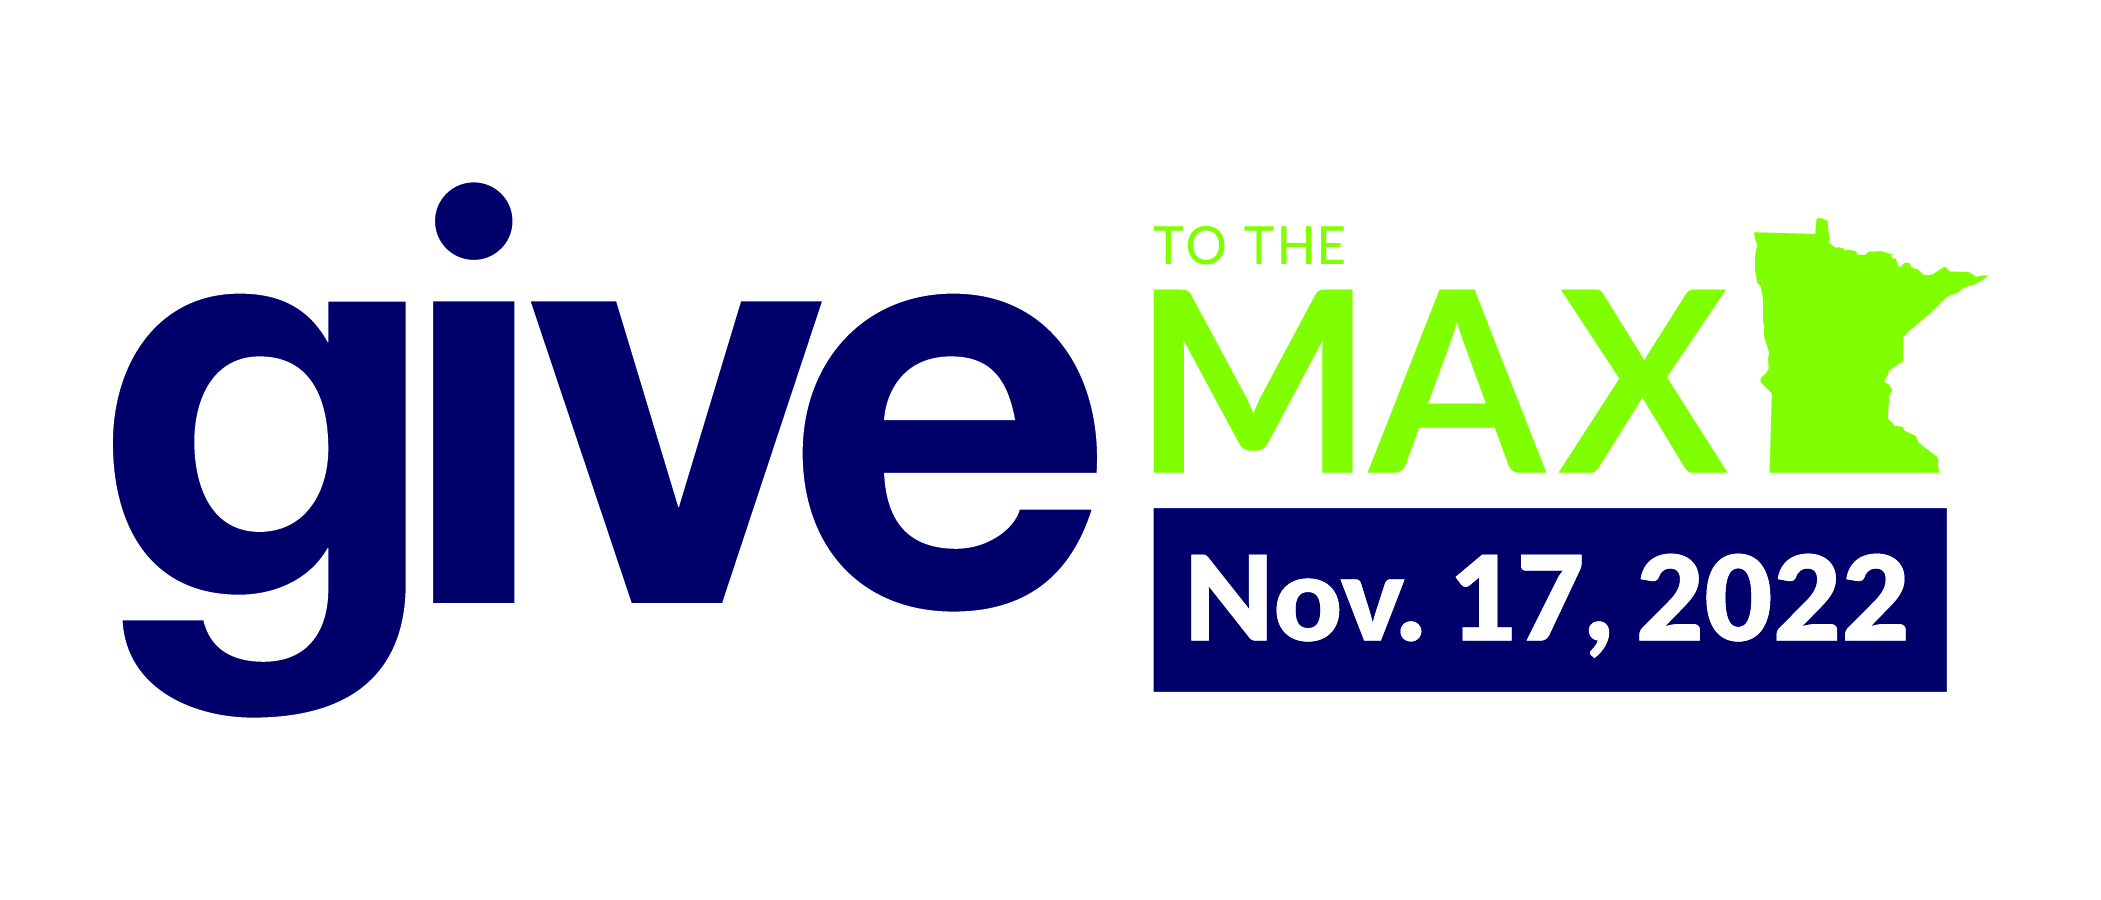 Give to the max logo and date